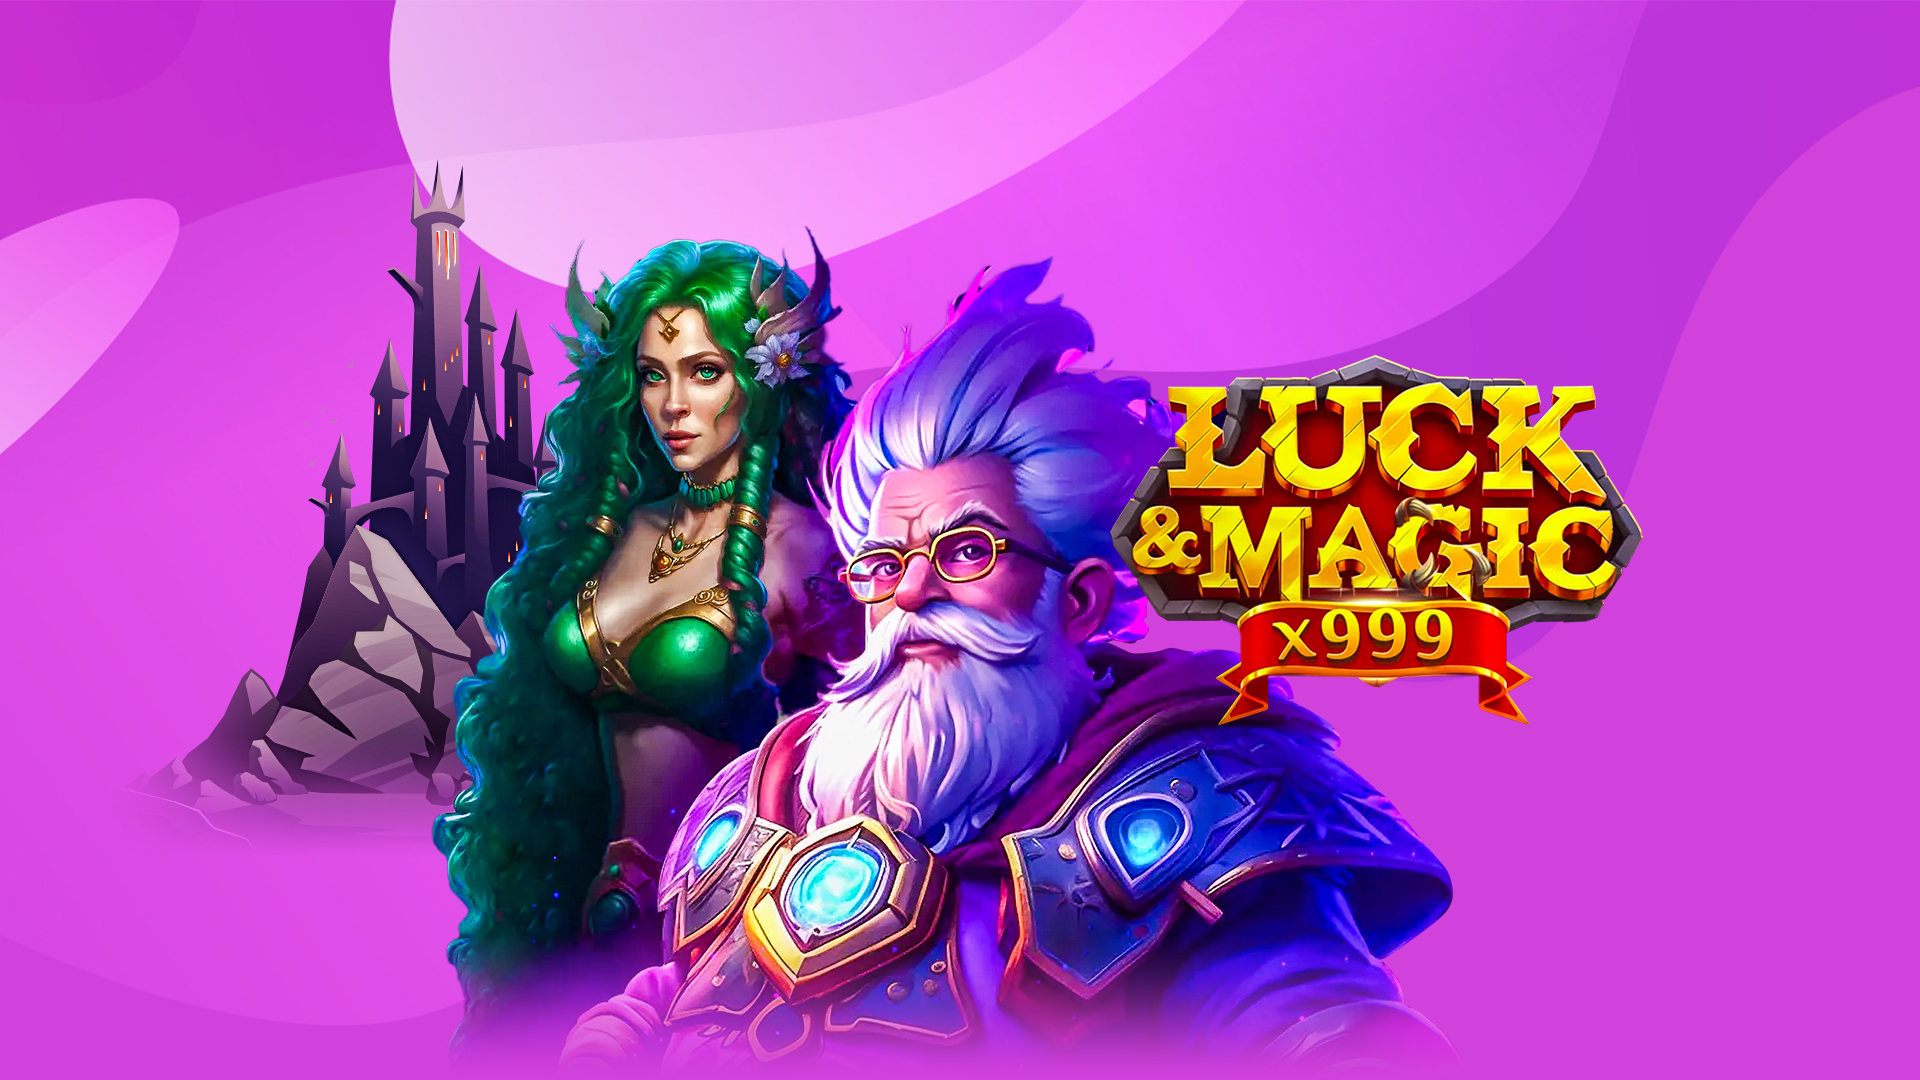 A woman and man cartoon warriors next to the text ‘luck & magic x999’ against a purple background.